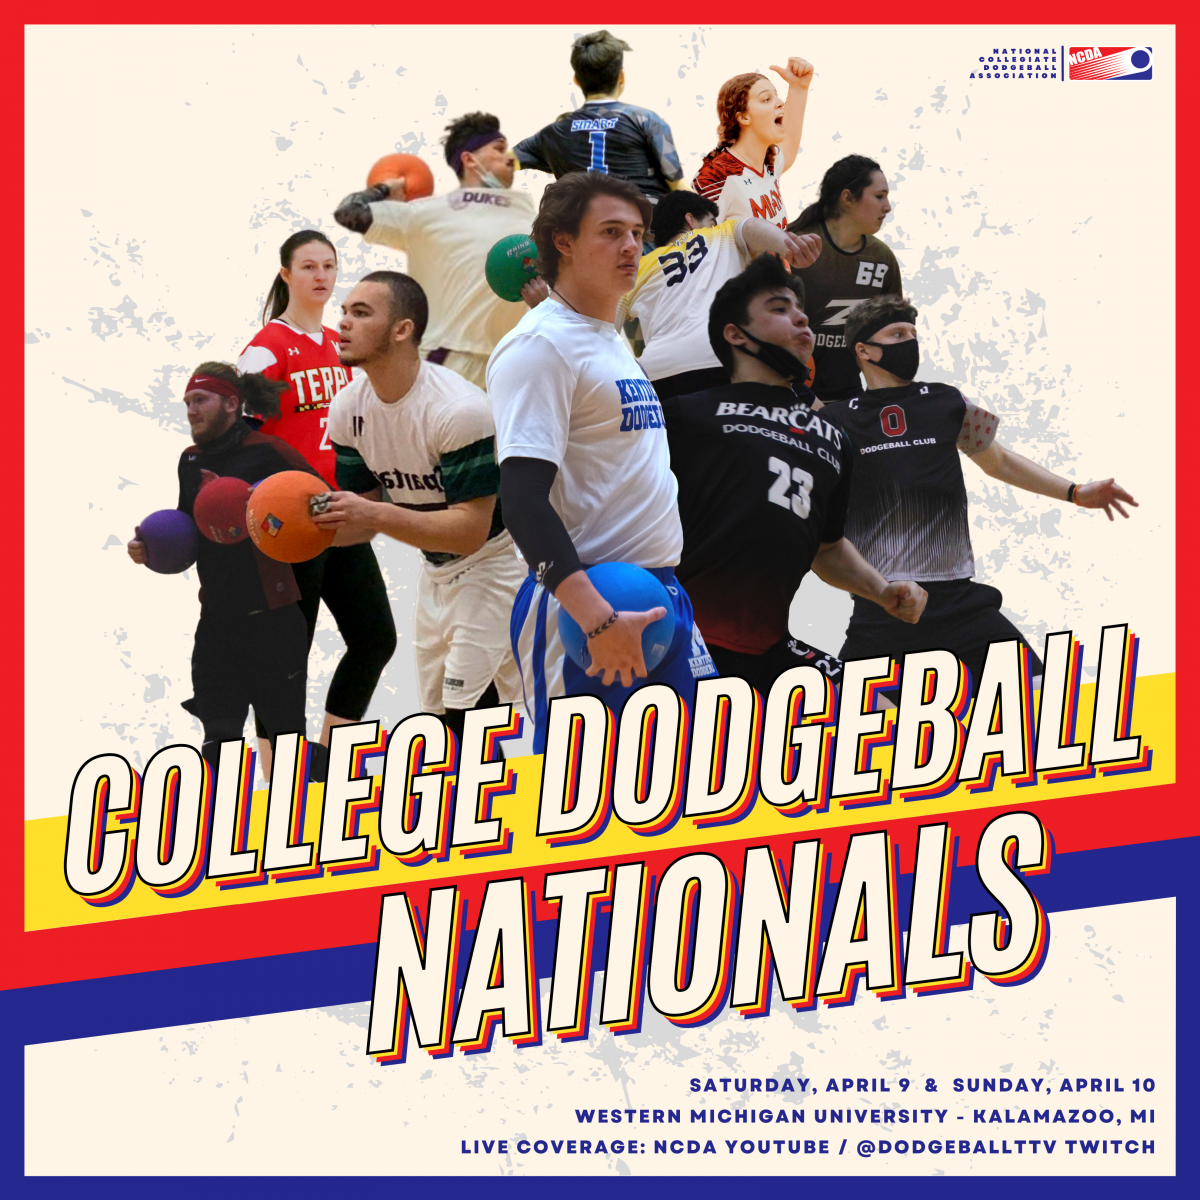 After 36 Months, College Dodgeball Returns to its Biggest Stage